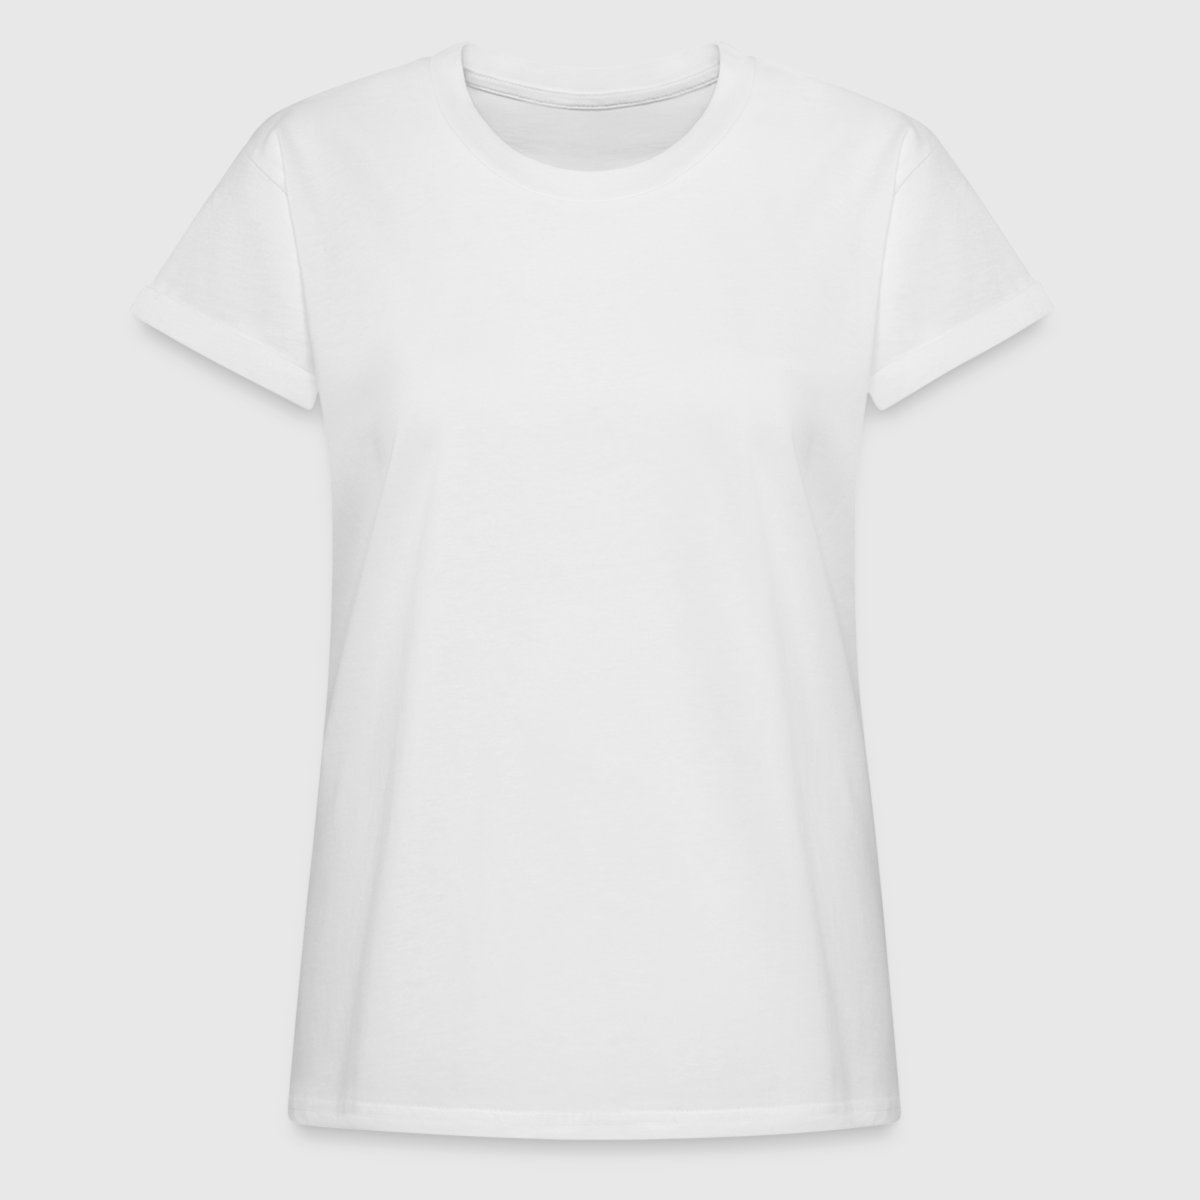 Women's Relaxed Fit T-Shirt - Front